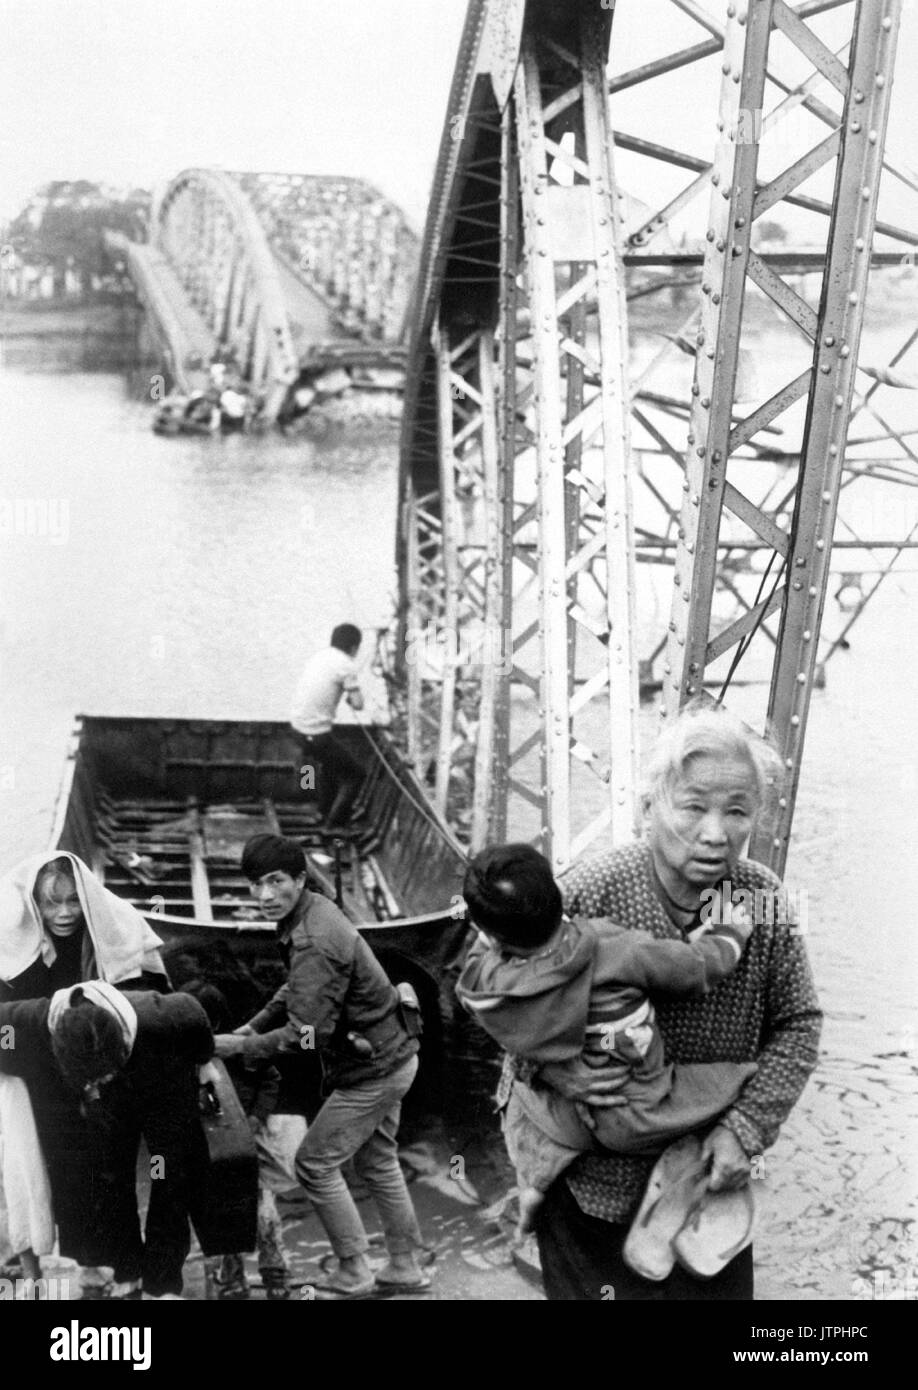 The old and the young flee Tet offensive fighting in Hue, managing to reach the south shore of the Perfume River despite this blown bridge.  1968. (USIA) EXACT DATE SHOT UNKNOWN NARA FILE #:  306-MVP-22-9 WAR & CONFLICT BOOK #:  406 Stock Photo